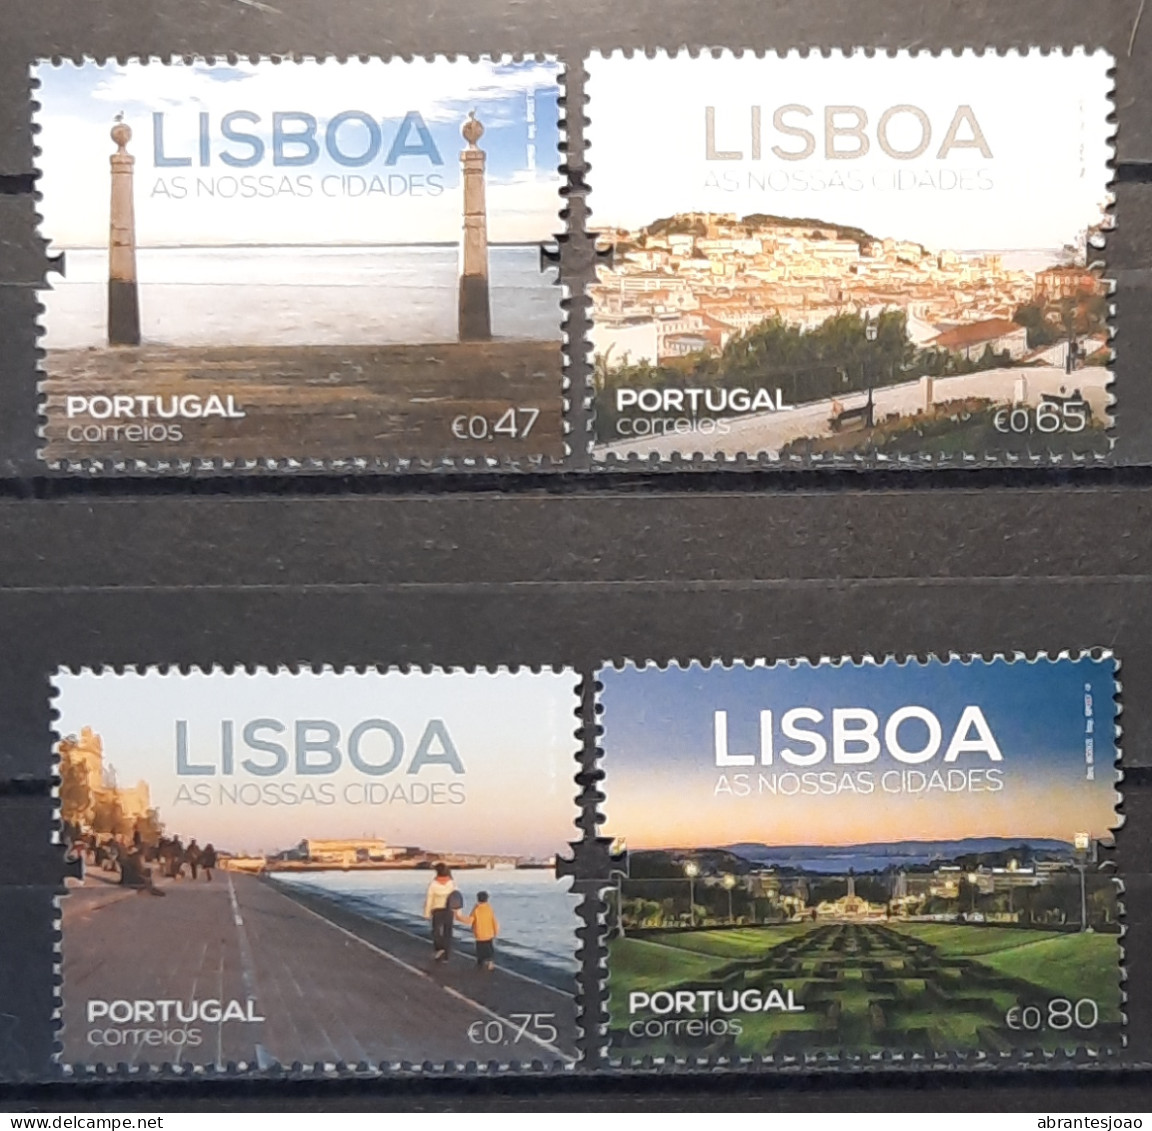 2016 - Portugal - MNH - Our Cities - Group 1 - Views Of Lisbon - 4 Stamps - Unused Stamps